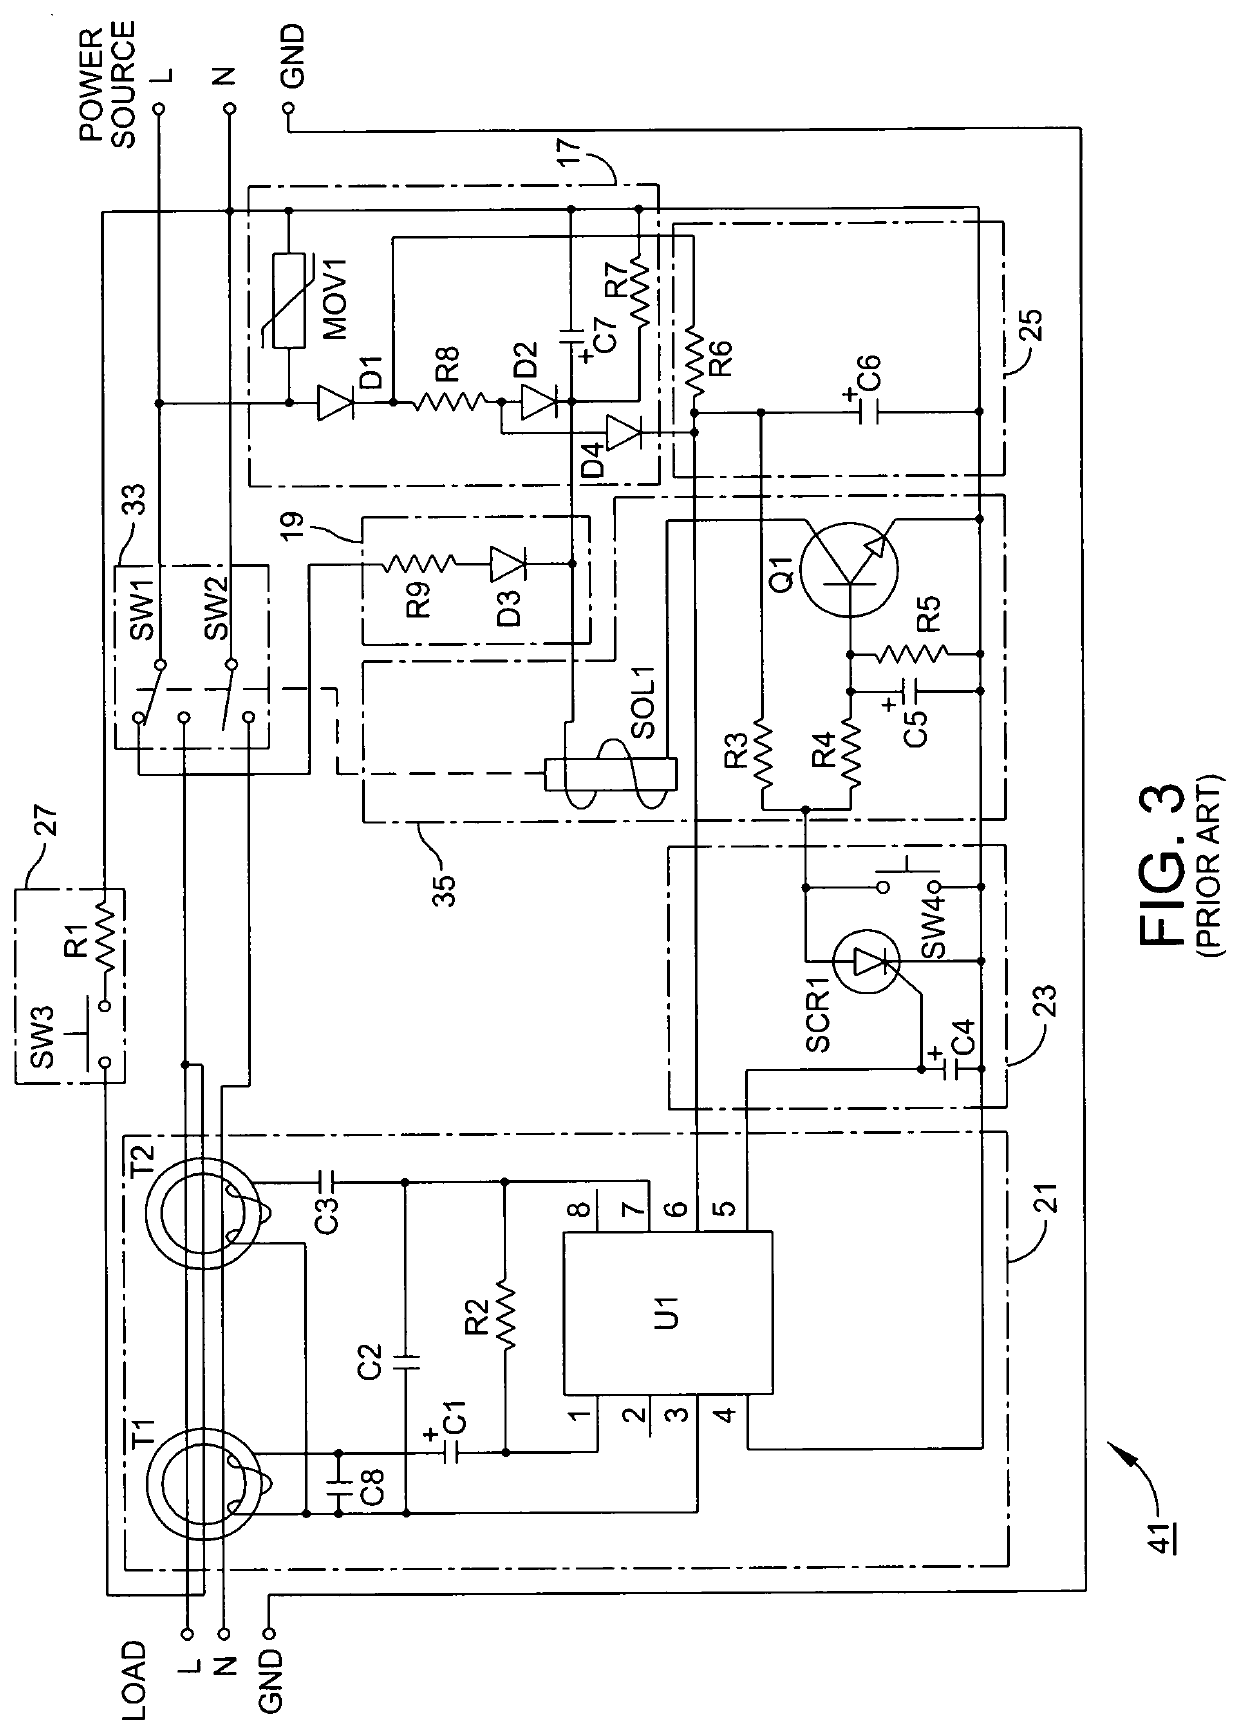 Universal ground fault circuit interrupter (GFCI) device and printed circuit board package